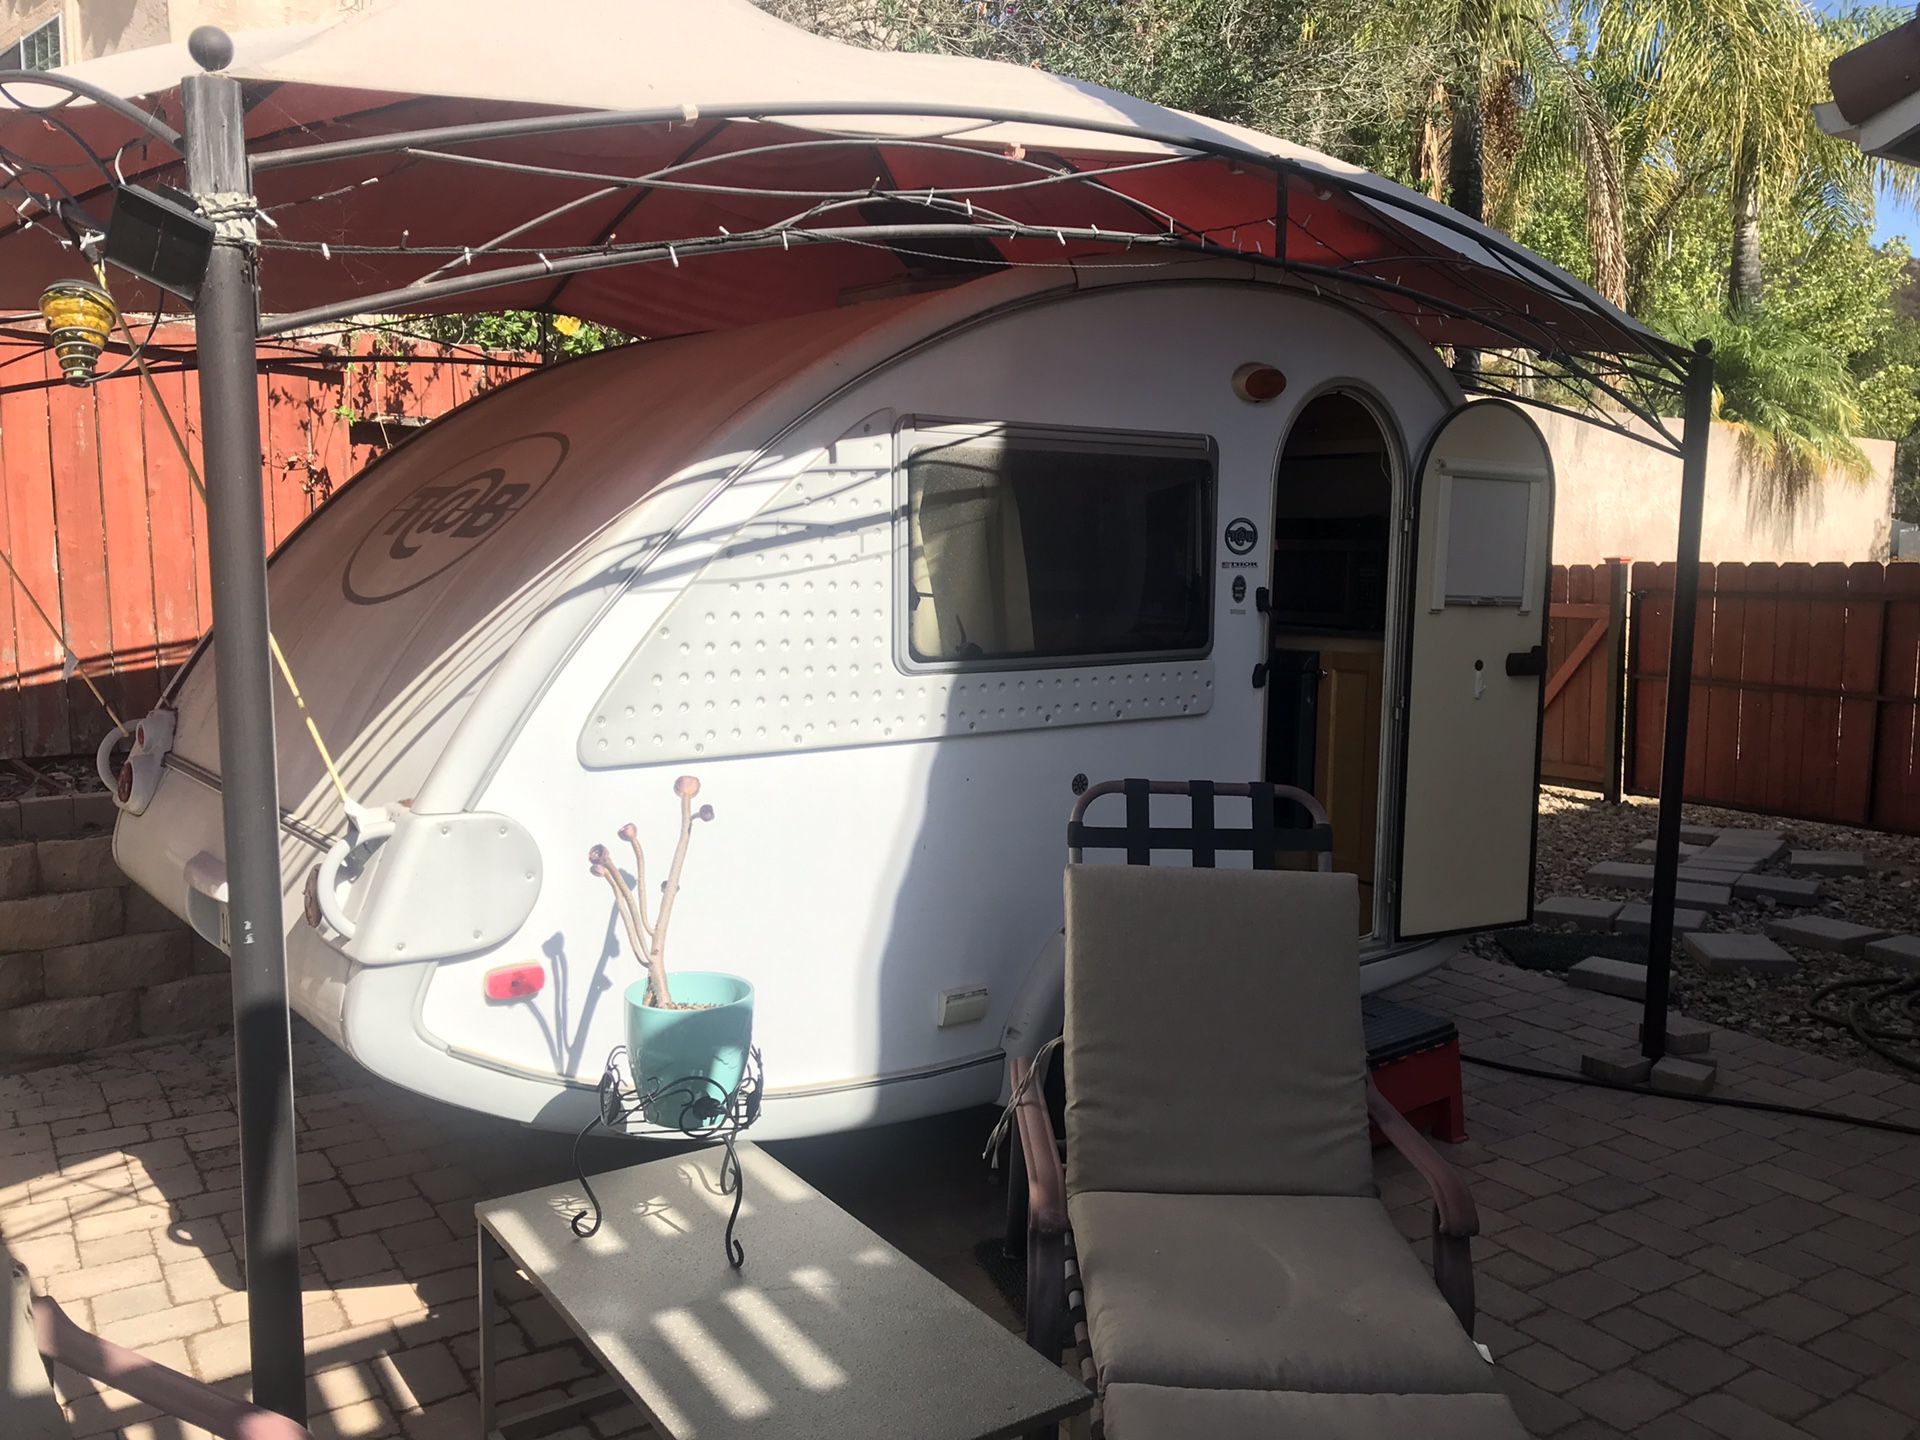 2008 T@B Teardrop Camper Trailer- motivated to sell!